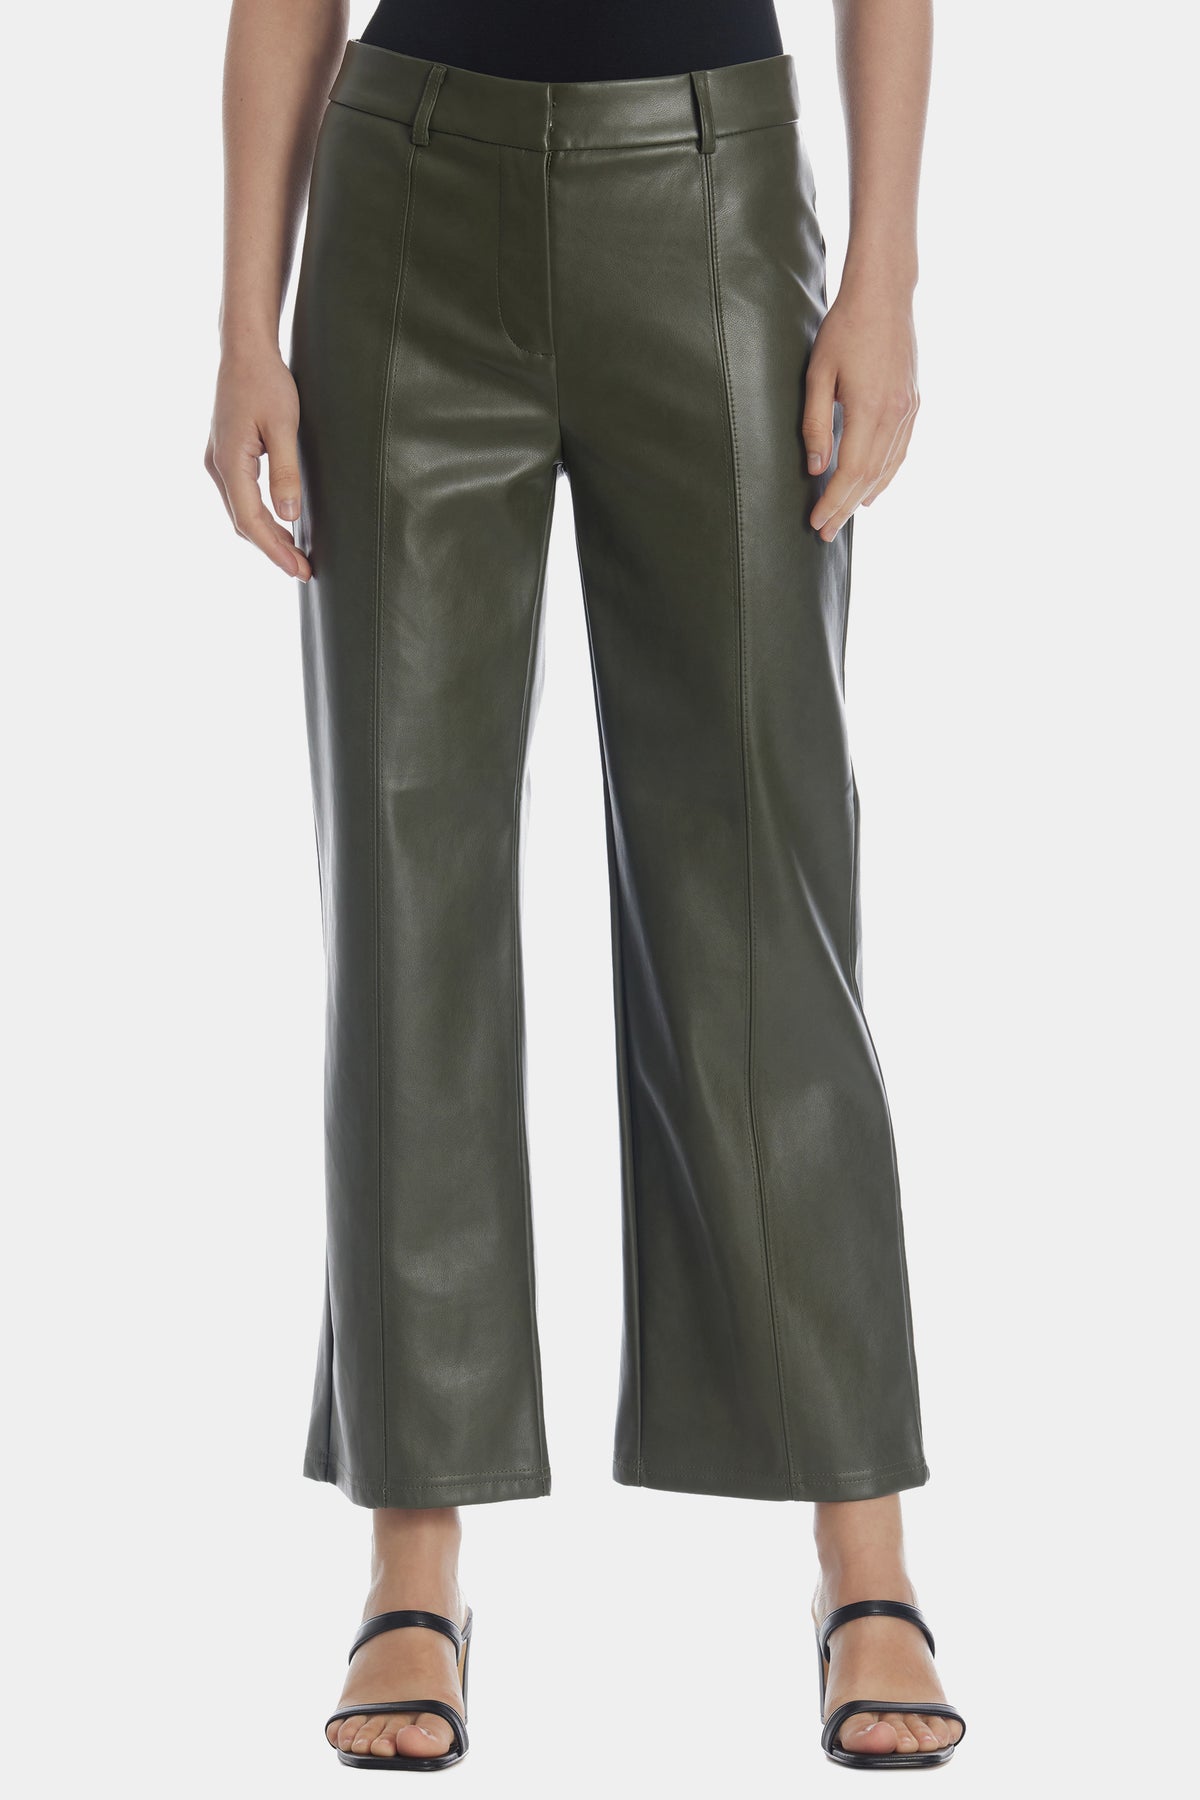 Heidi Paperbag Waist Faux Leather Trousers In Oxblood - Blush Boutique